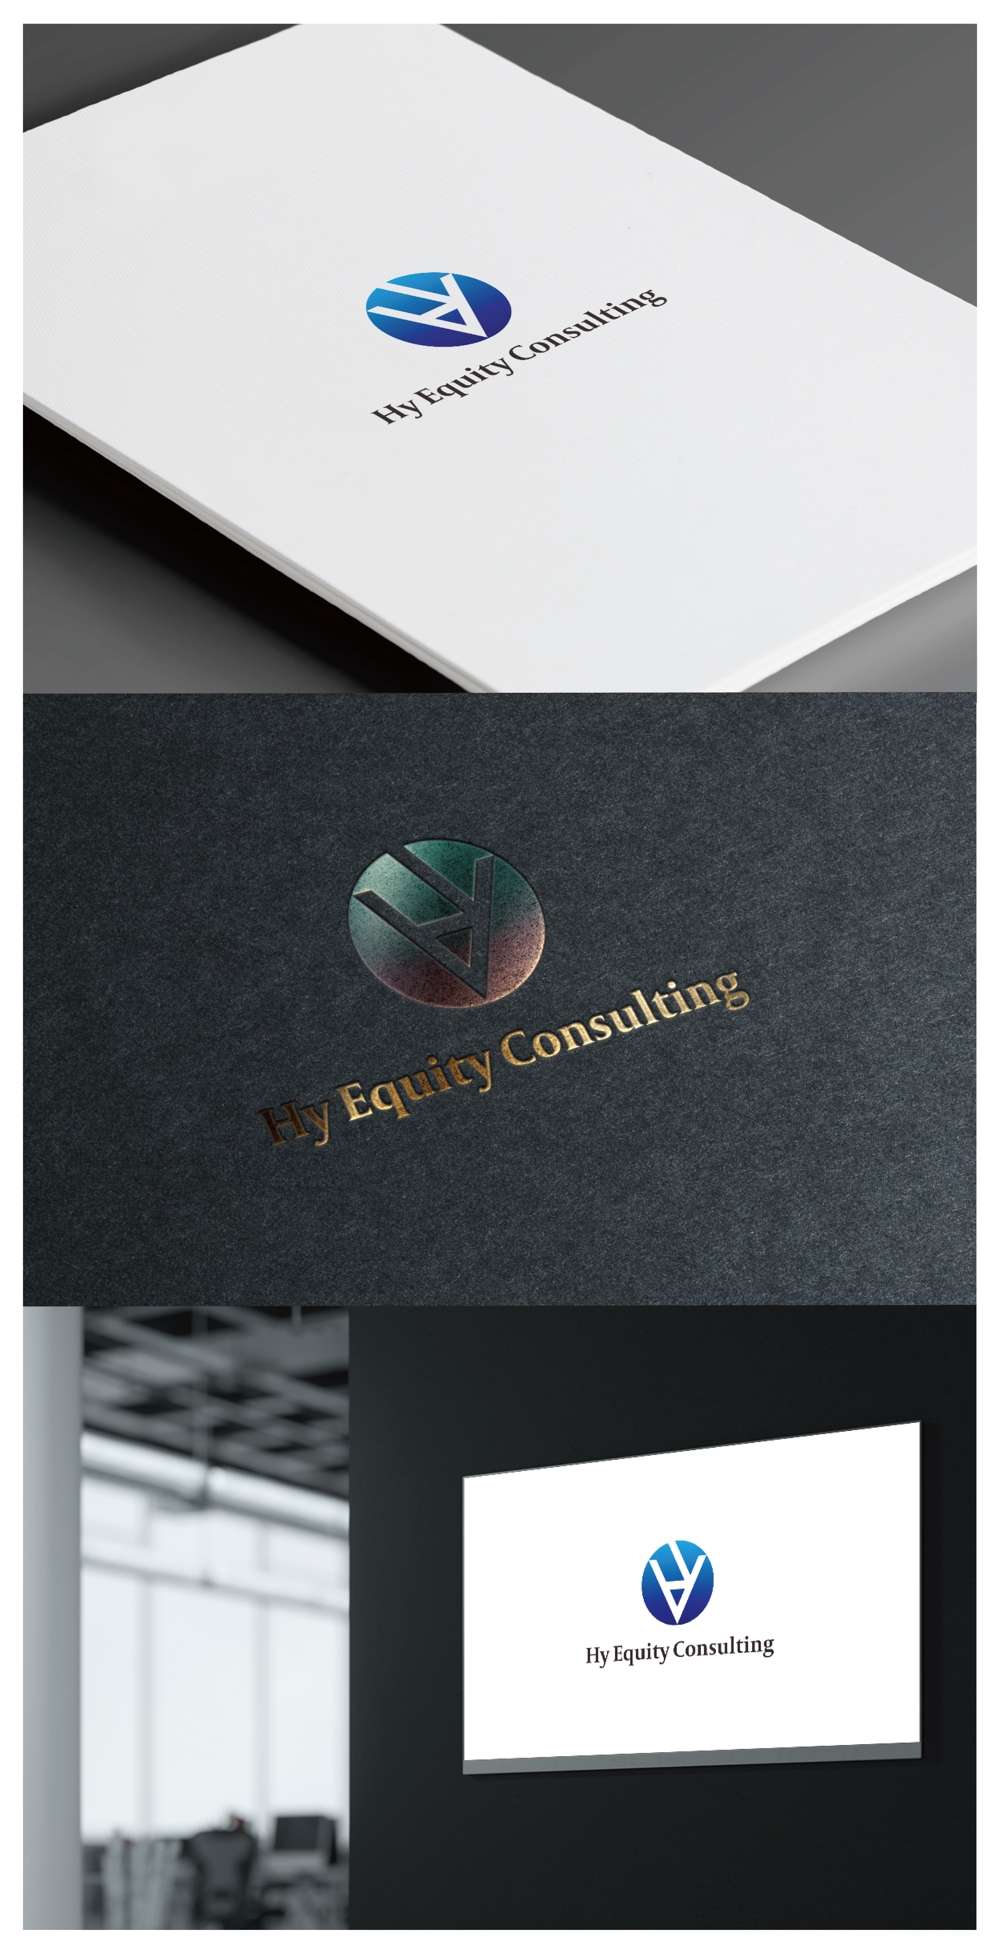 Hy Equity Consulting_logo02_01.jpg